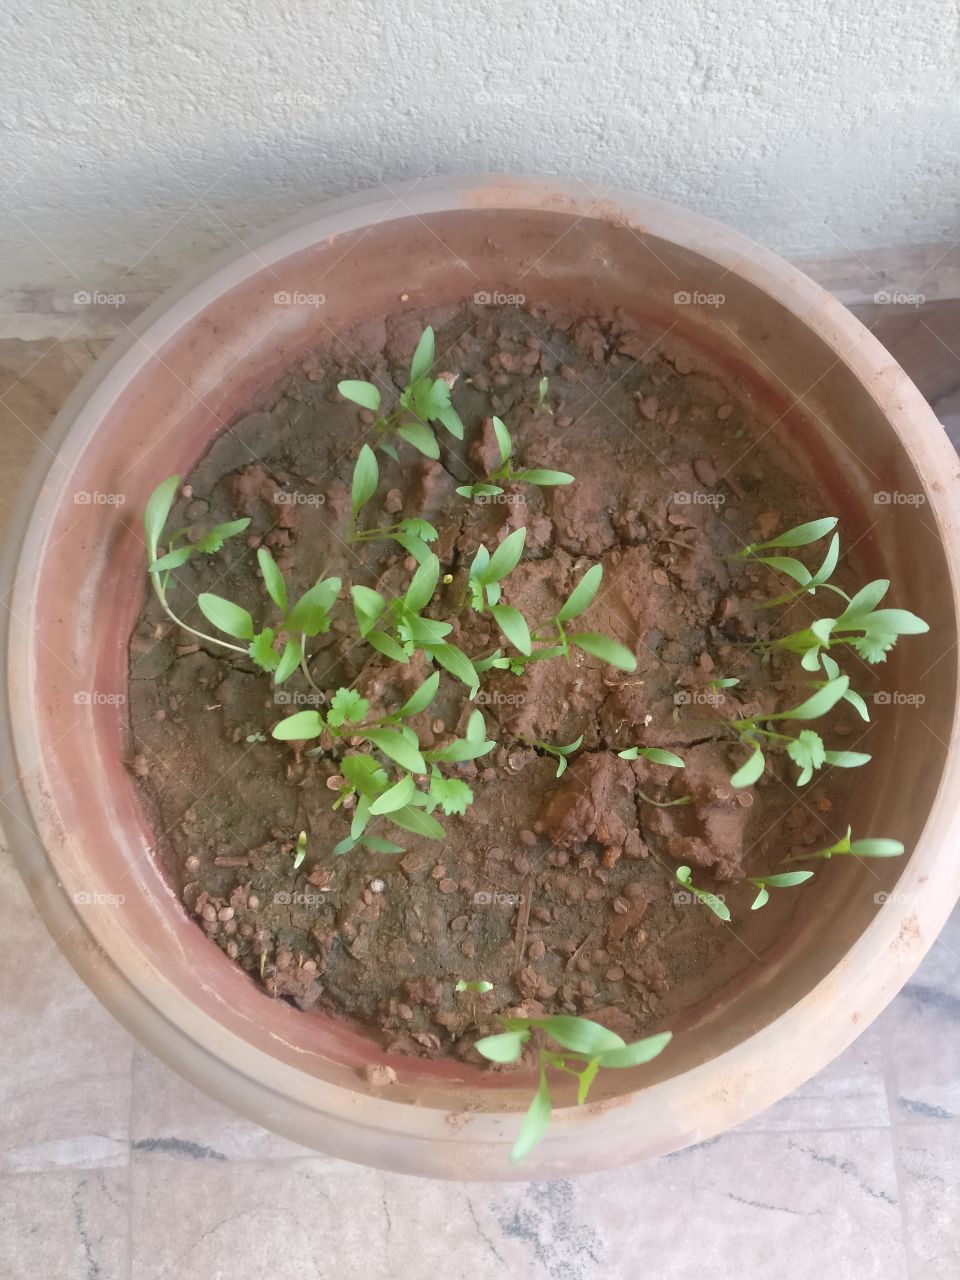 Growing coriander at home.. Feels good and happy..